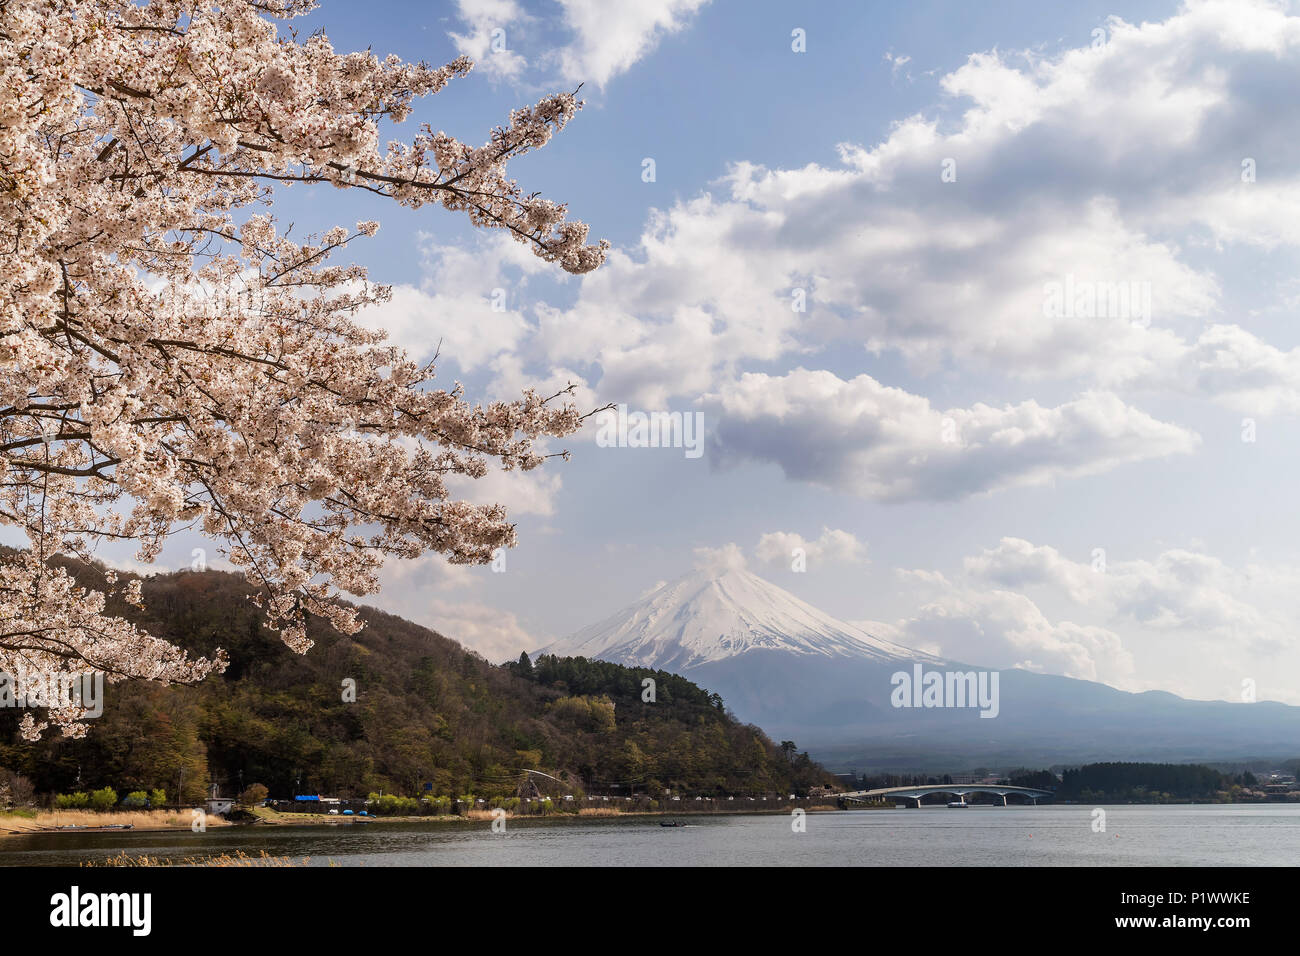 Blossoming trees in the Kawaguchi lake area with Mount Fuji in the background, Japan Stock Photo